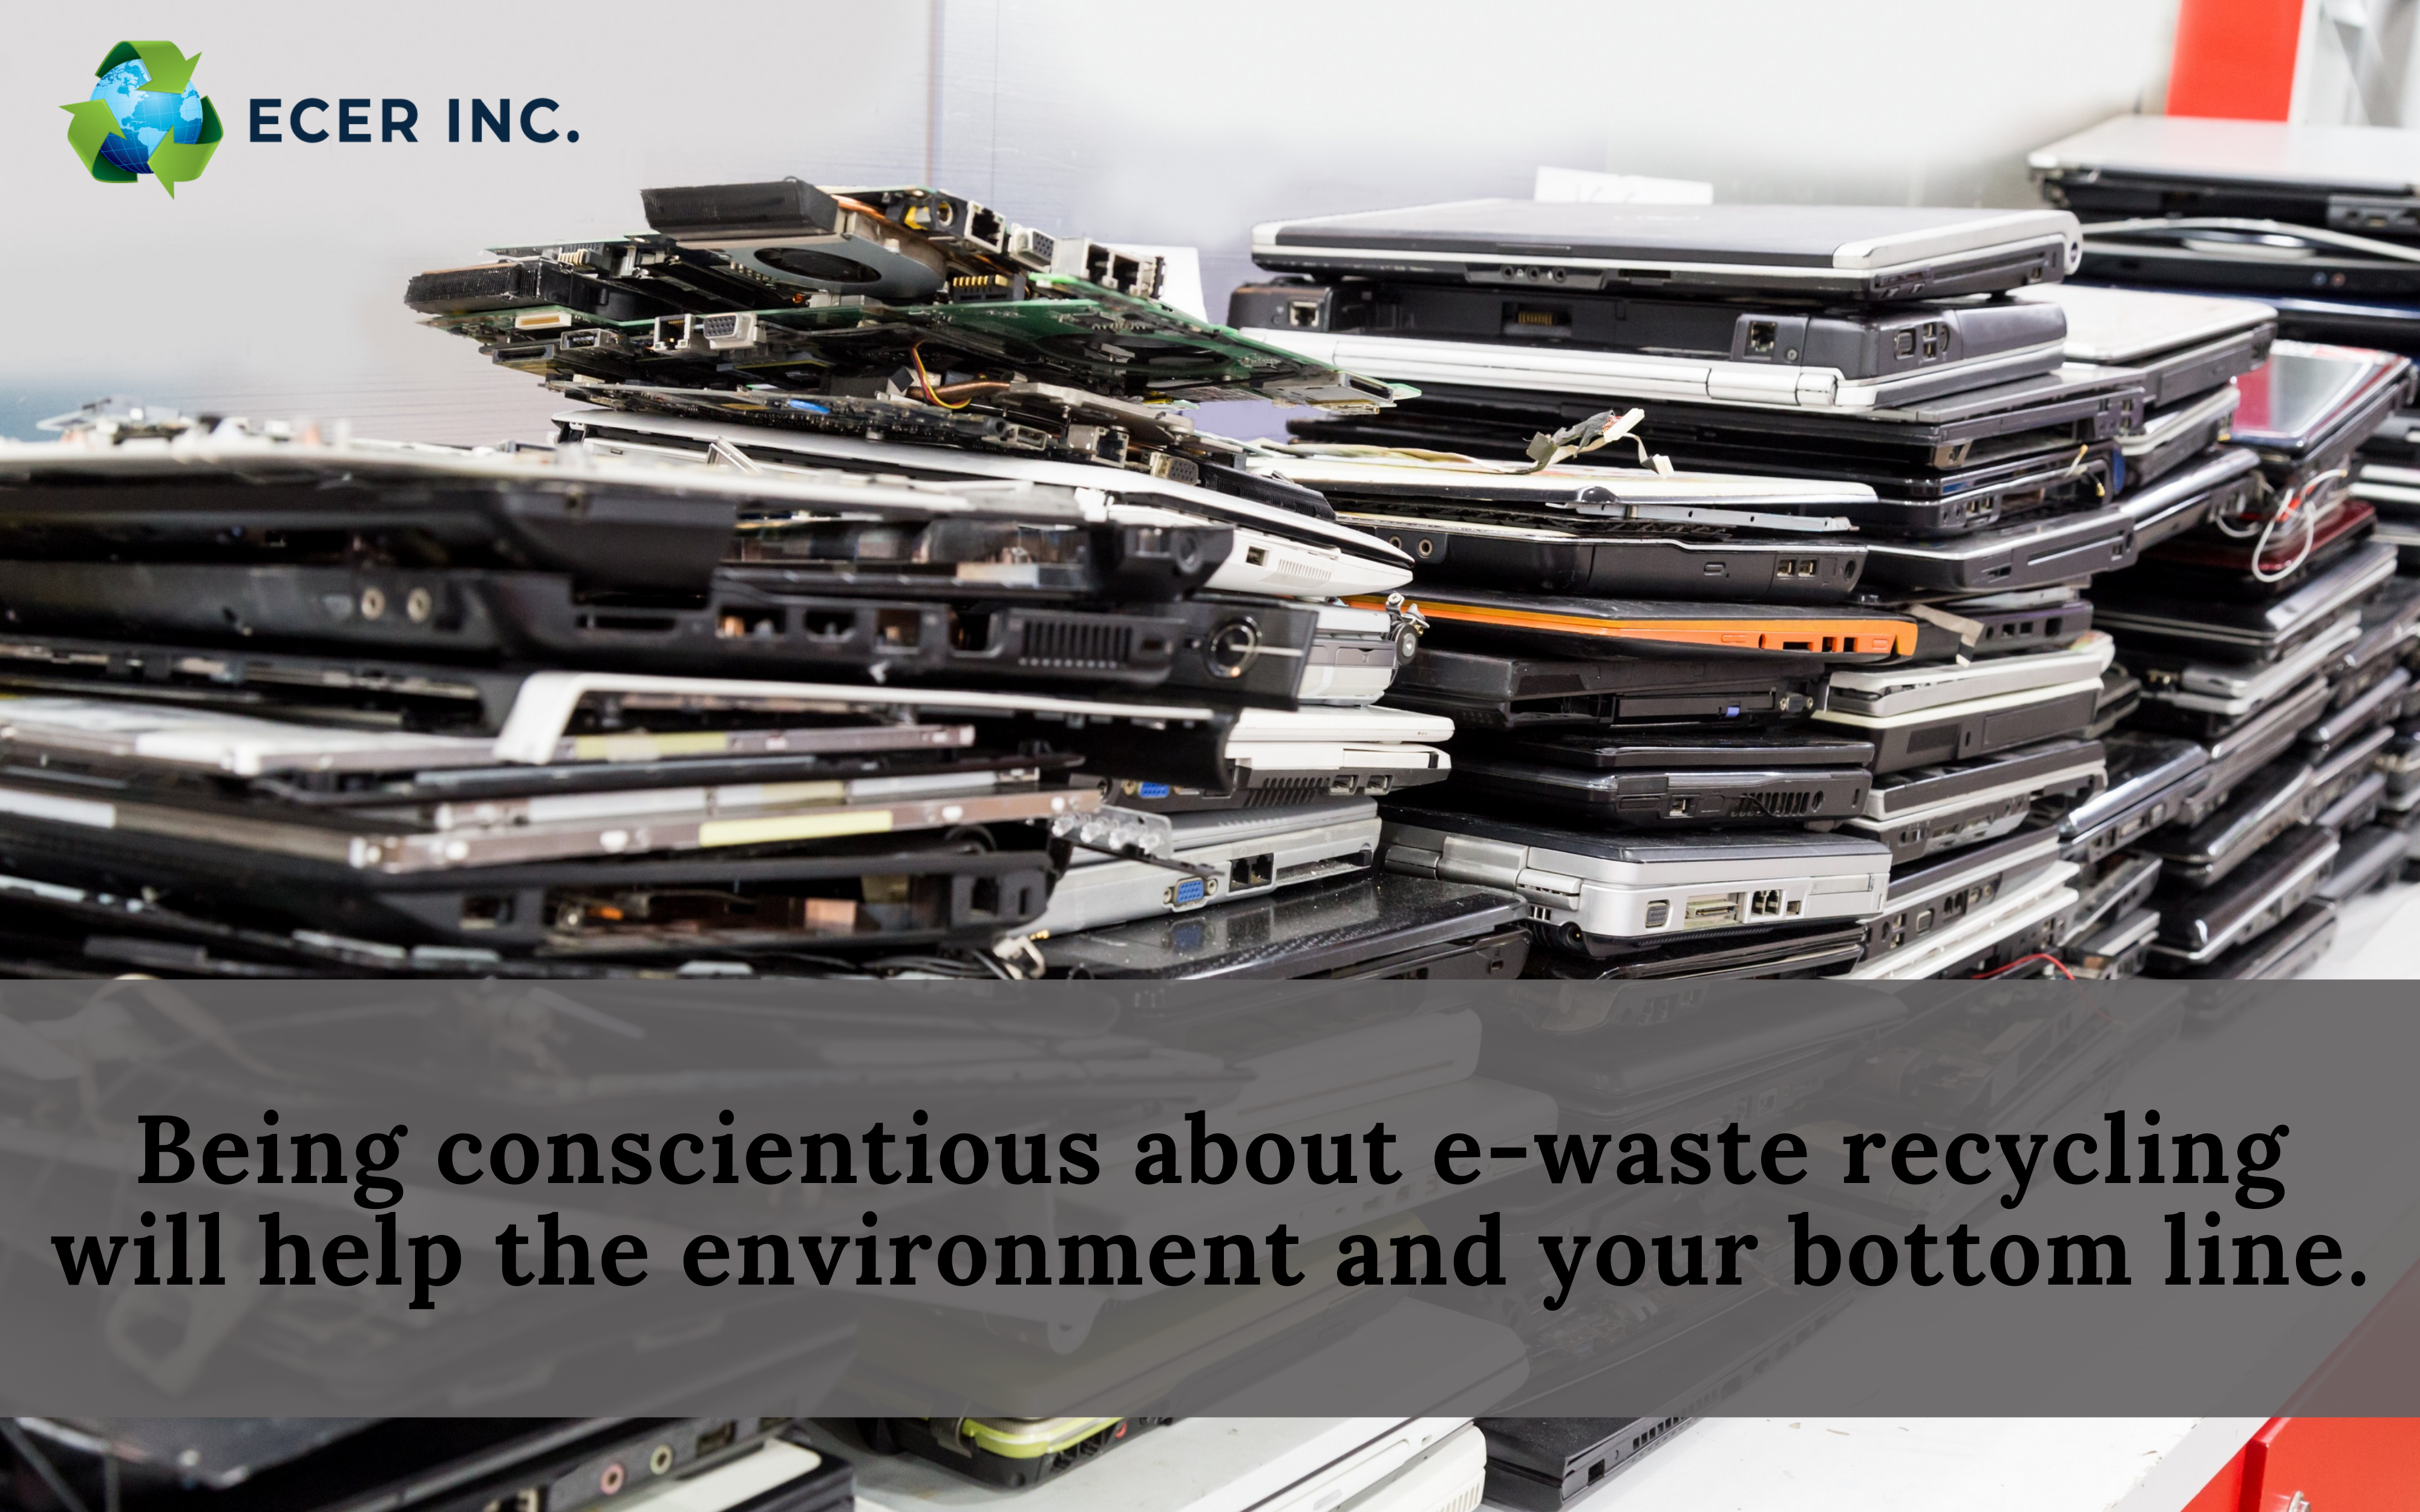 East Coast Electronics Recycling, Monday, February 21, 2022, Press release picture